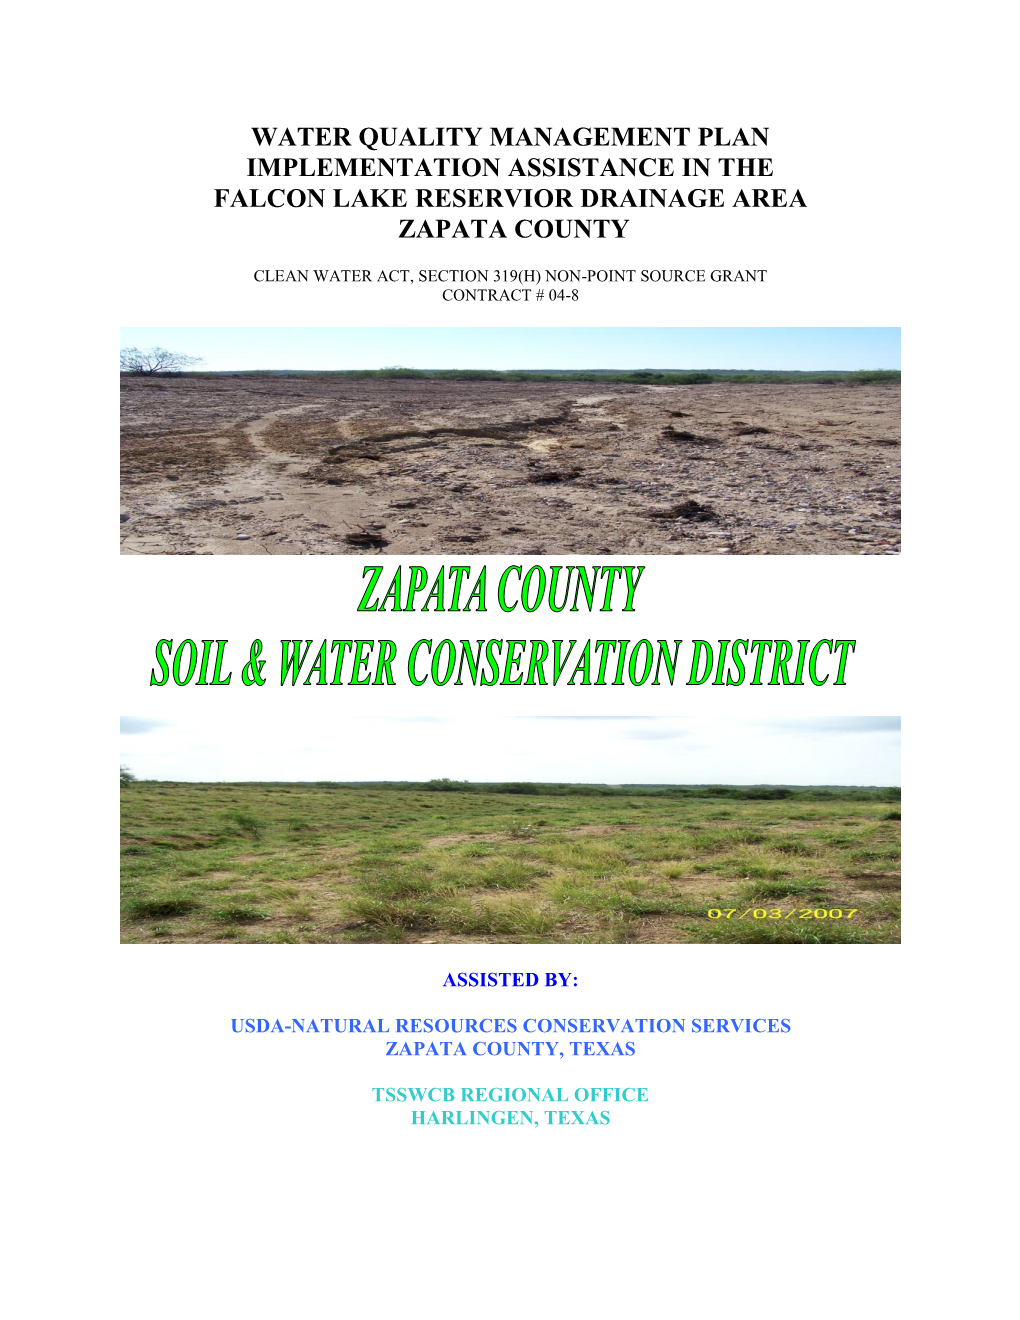 WQMP Implementation Assistance in the Falcon Reservoir Drainage Area in Zapata County